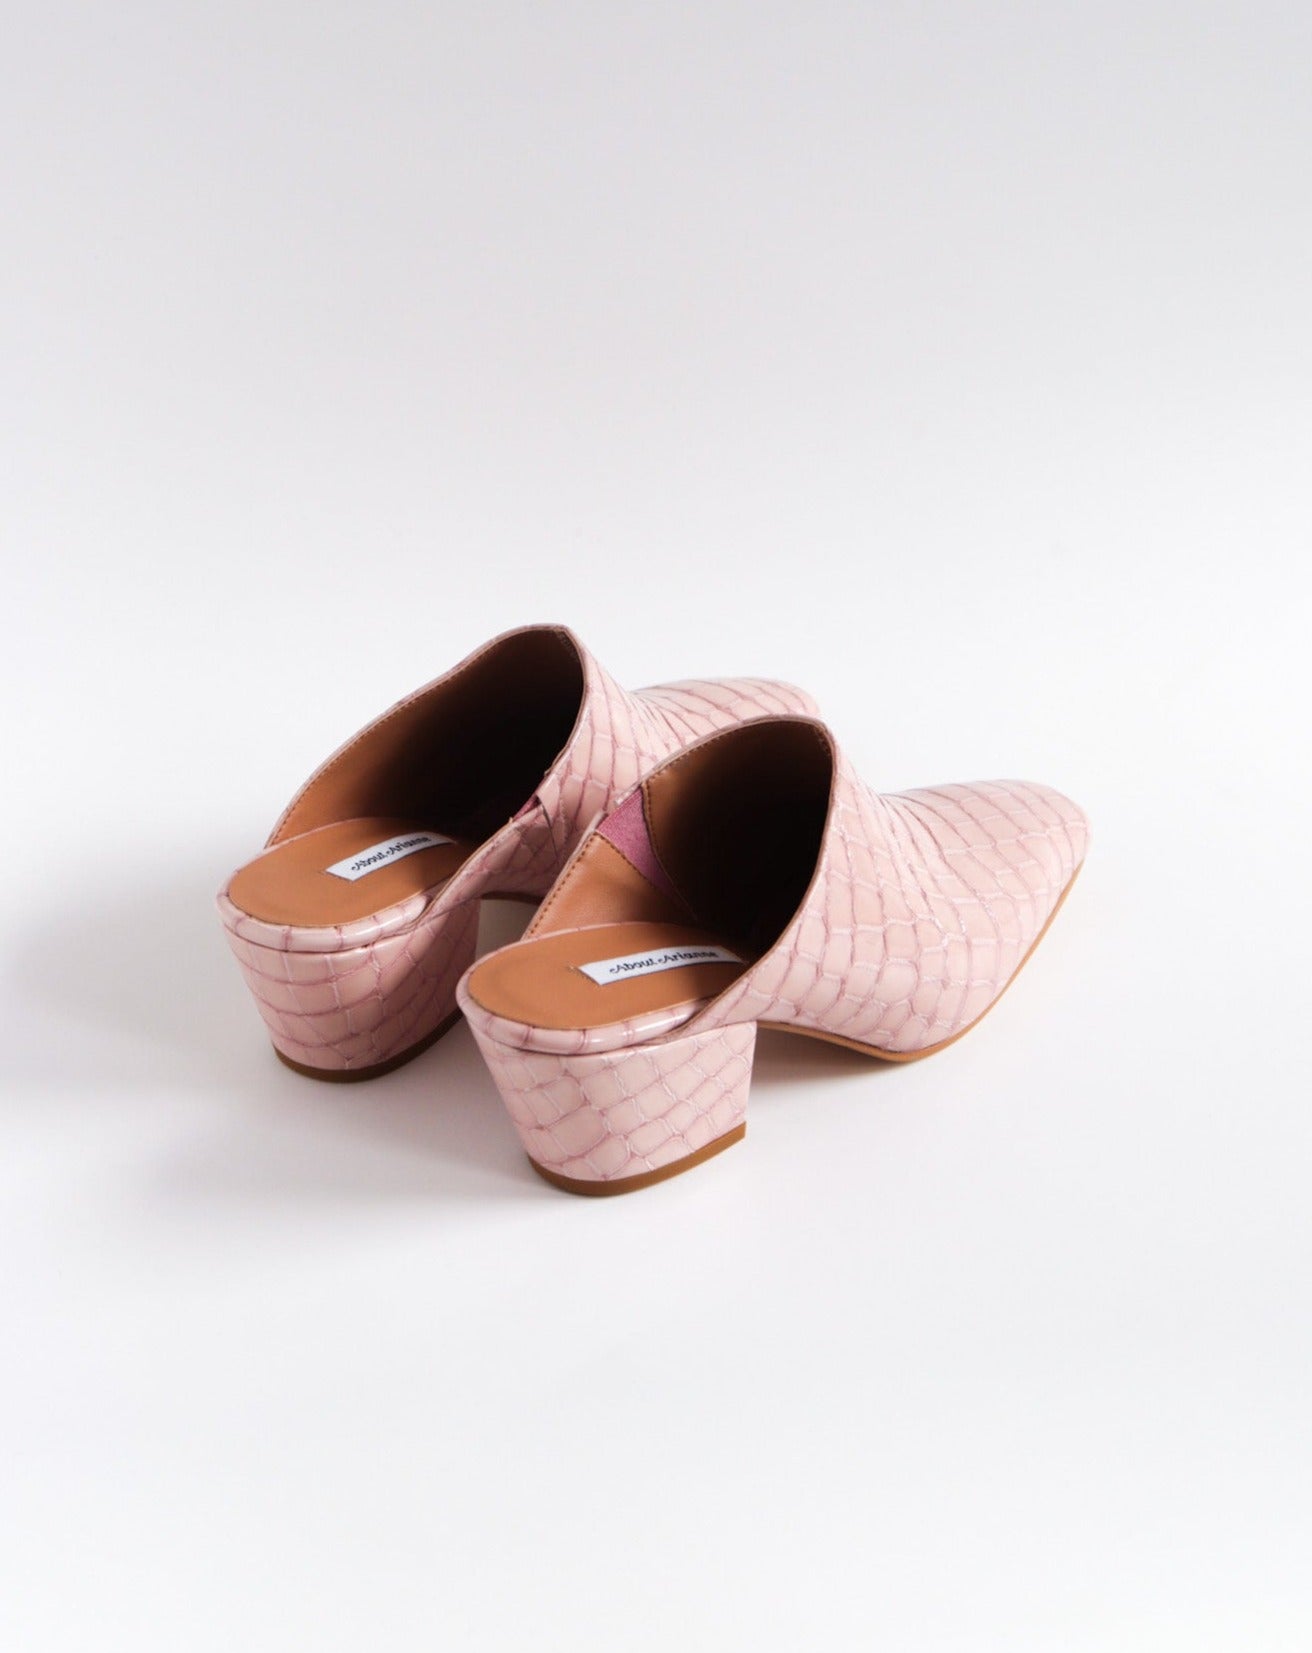 Pink 100% leather crocodile effect mules with almond shaped toe and block heel available at EASE Toronto